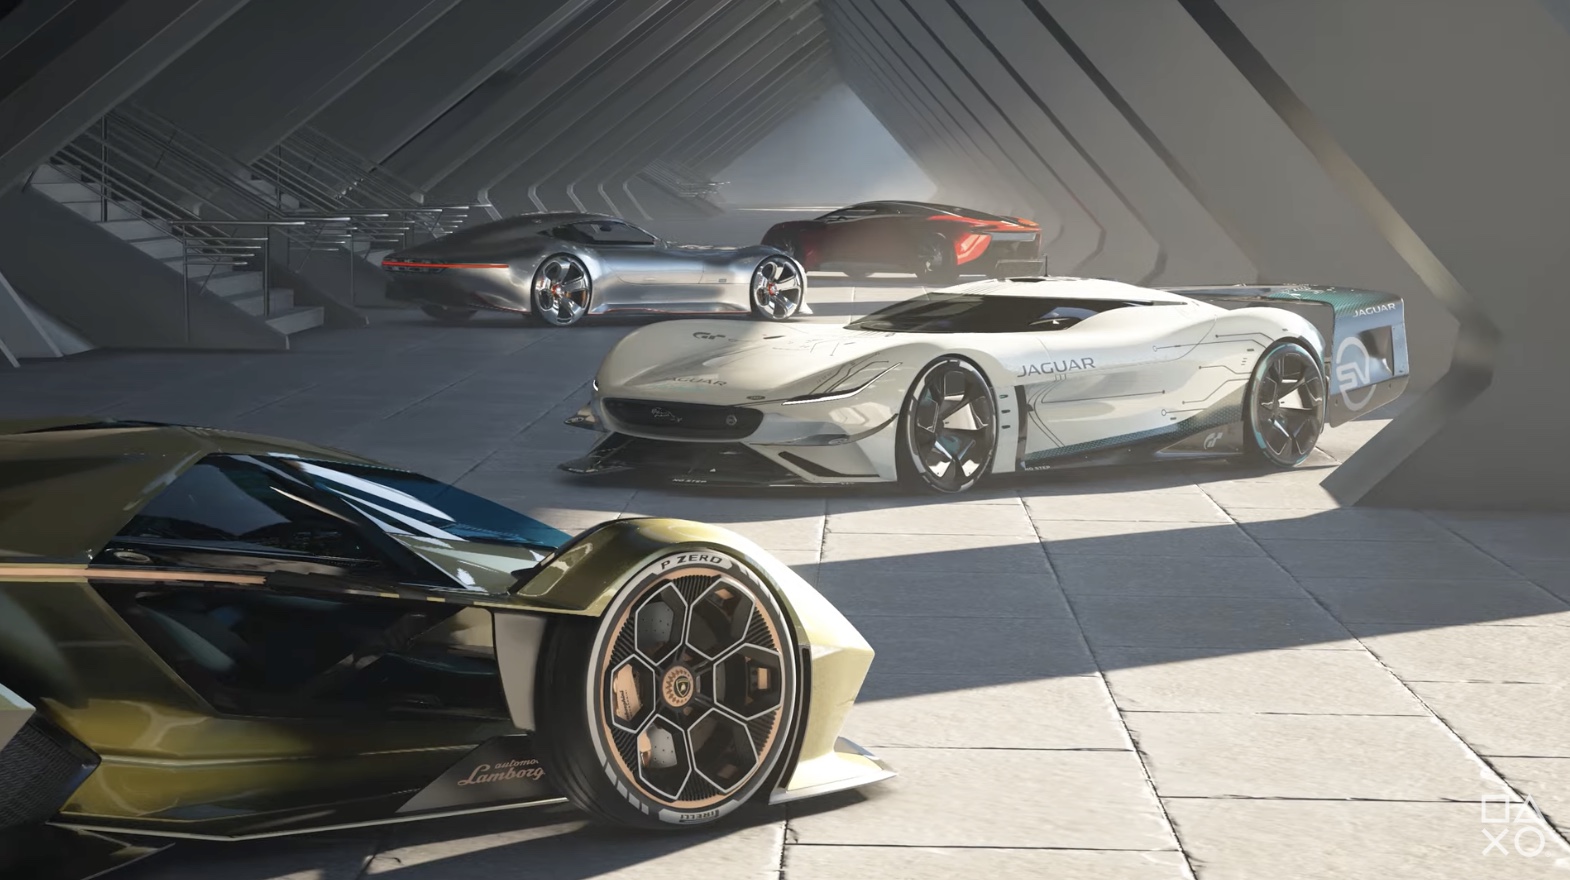 Gran Turismo 7 Update 1.38 adds exciting new cars, Extra Menus, and a new  Scapes location on Sep 28 – PlayStation.Blog